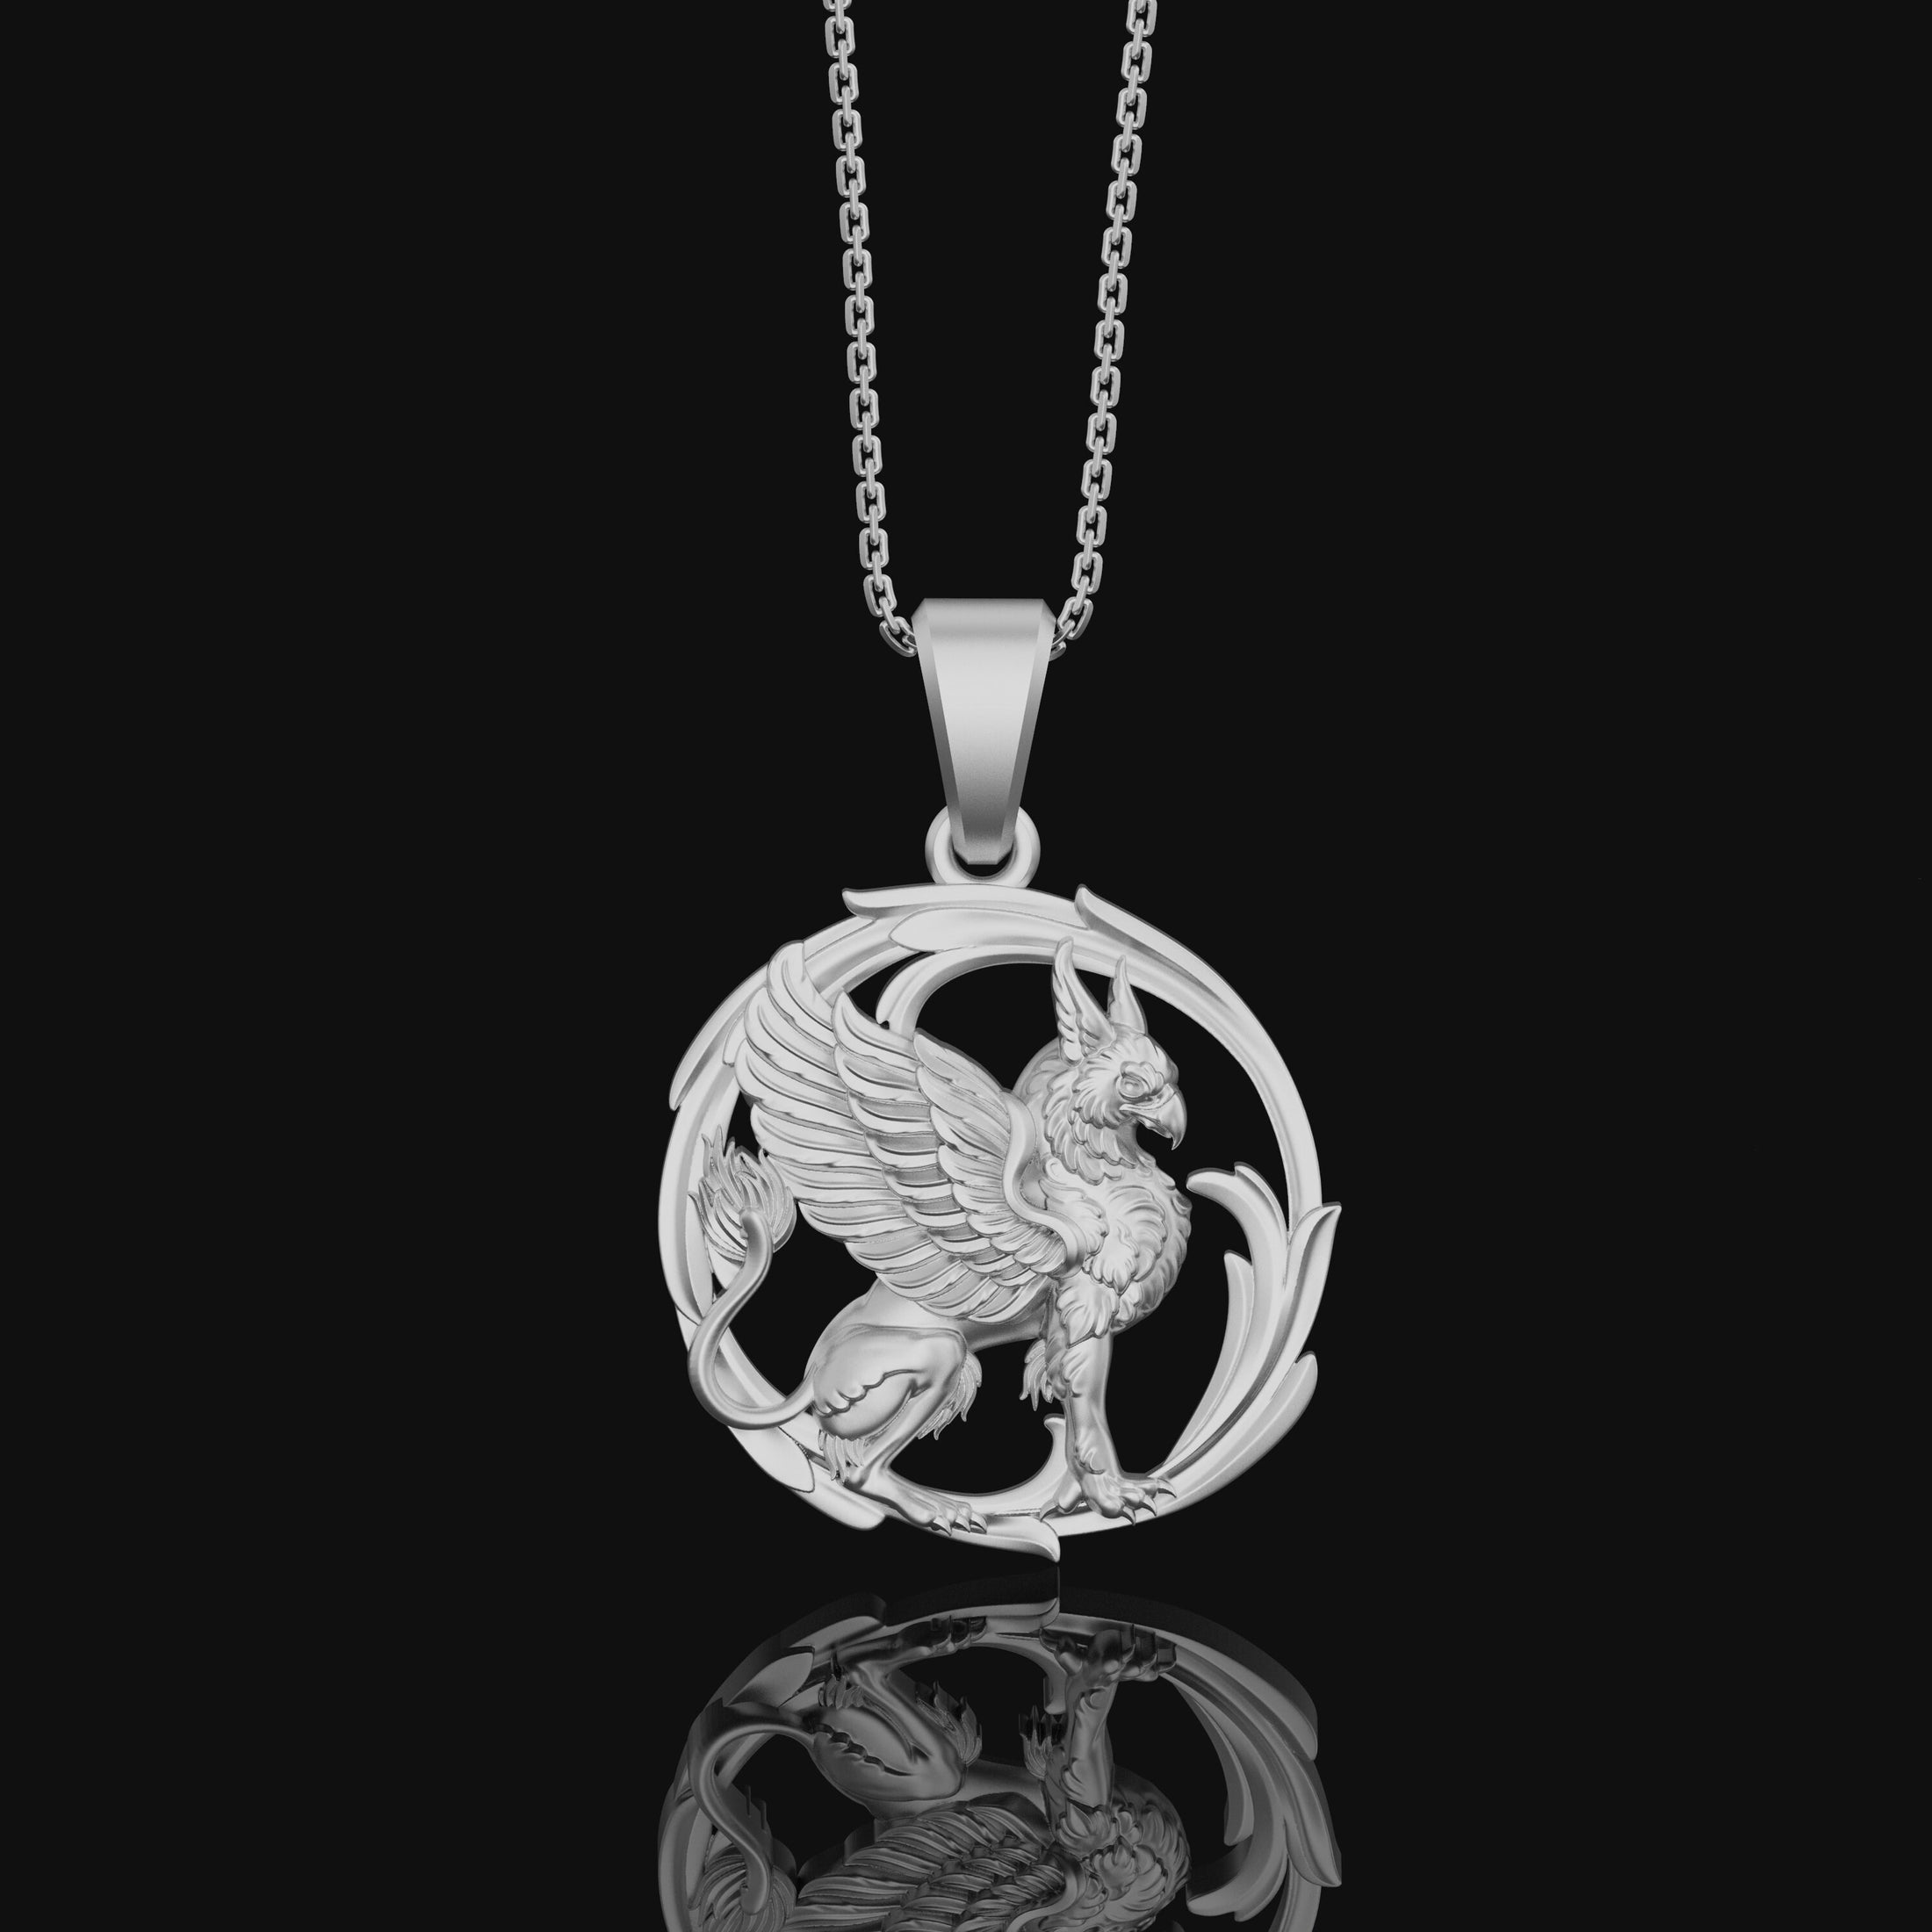 Silver Griffin Pendant - Mythical Gryphon Necklace, Fantasy Creature Jewelry, Magical Beast Gift, Mythological Bird